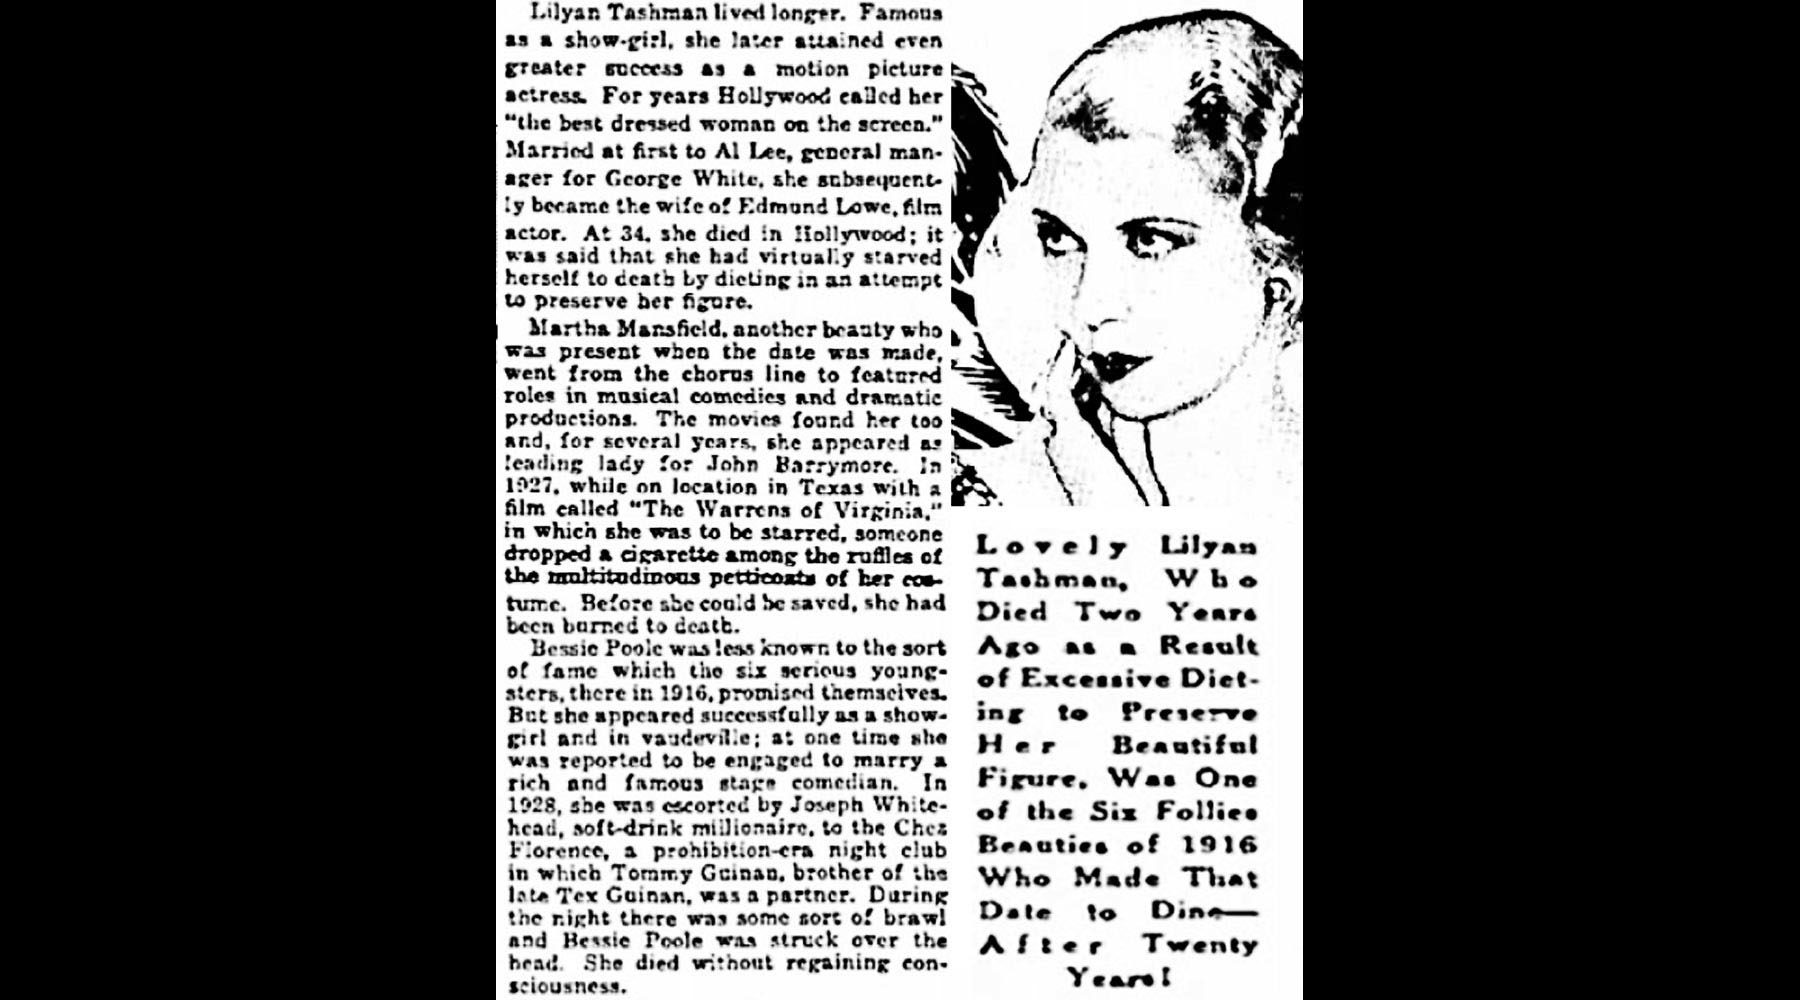 Lilyan Tashman died by virtually starving herself. Martha Mansfield burned to death. Bessie Poole liked the bottle too much.